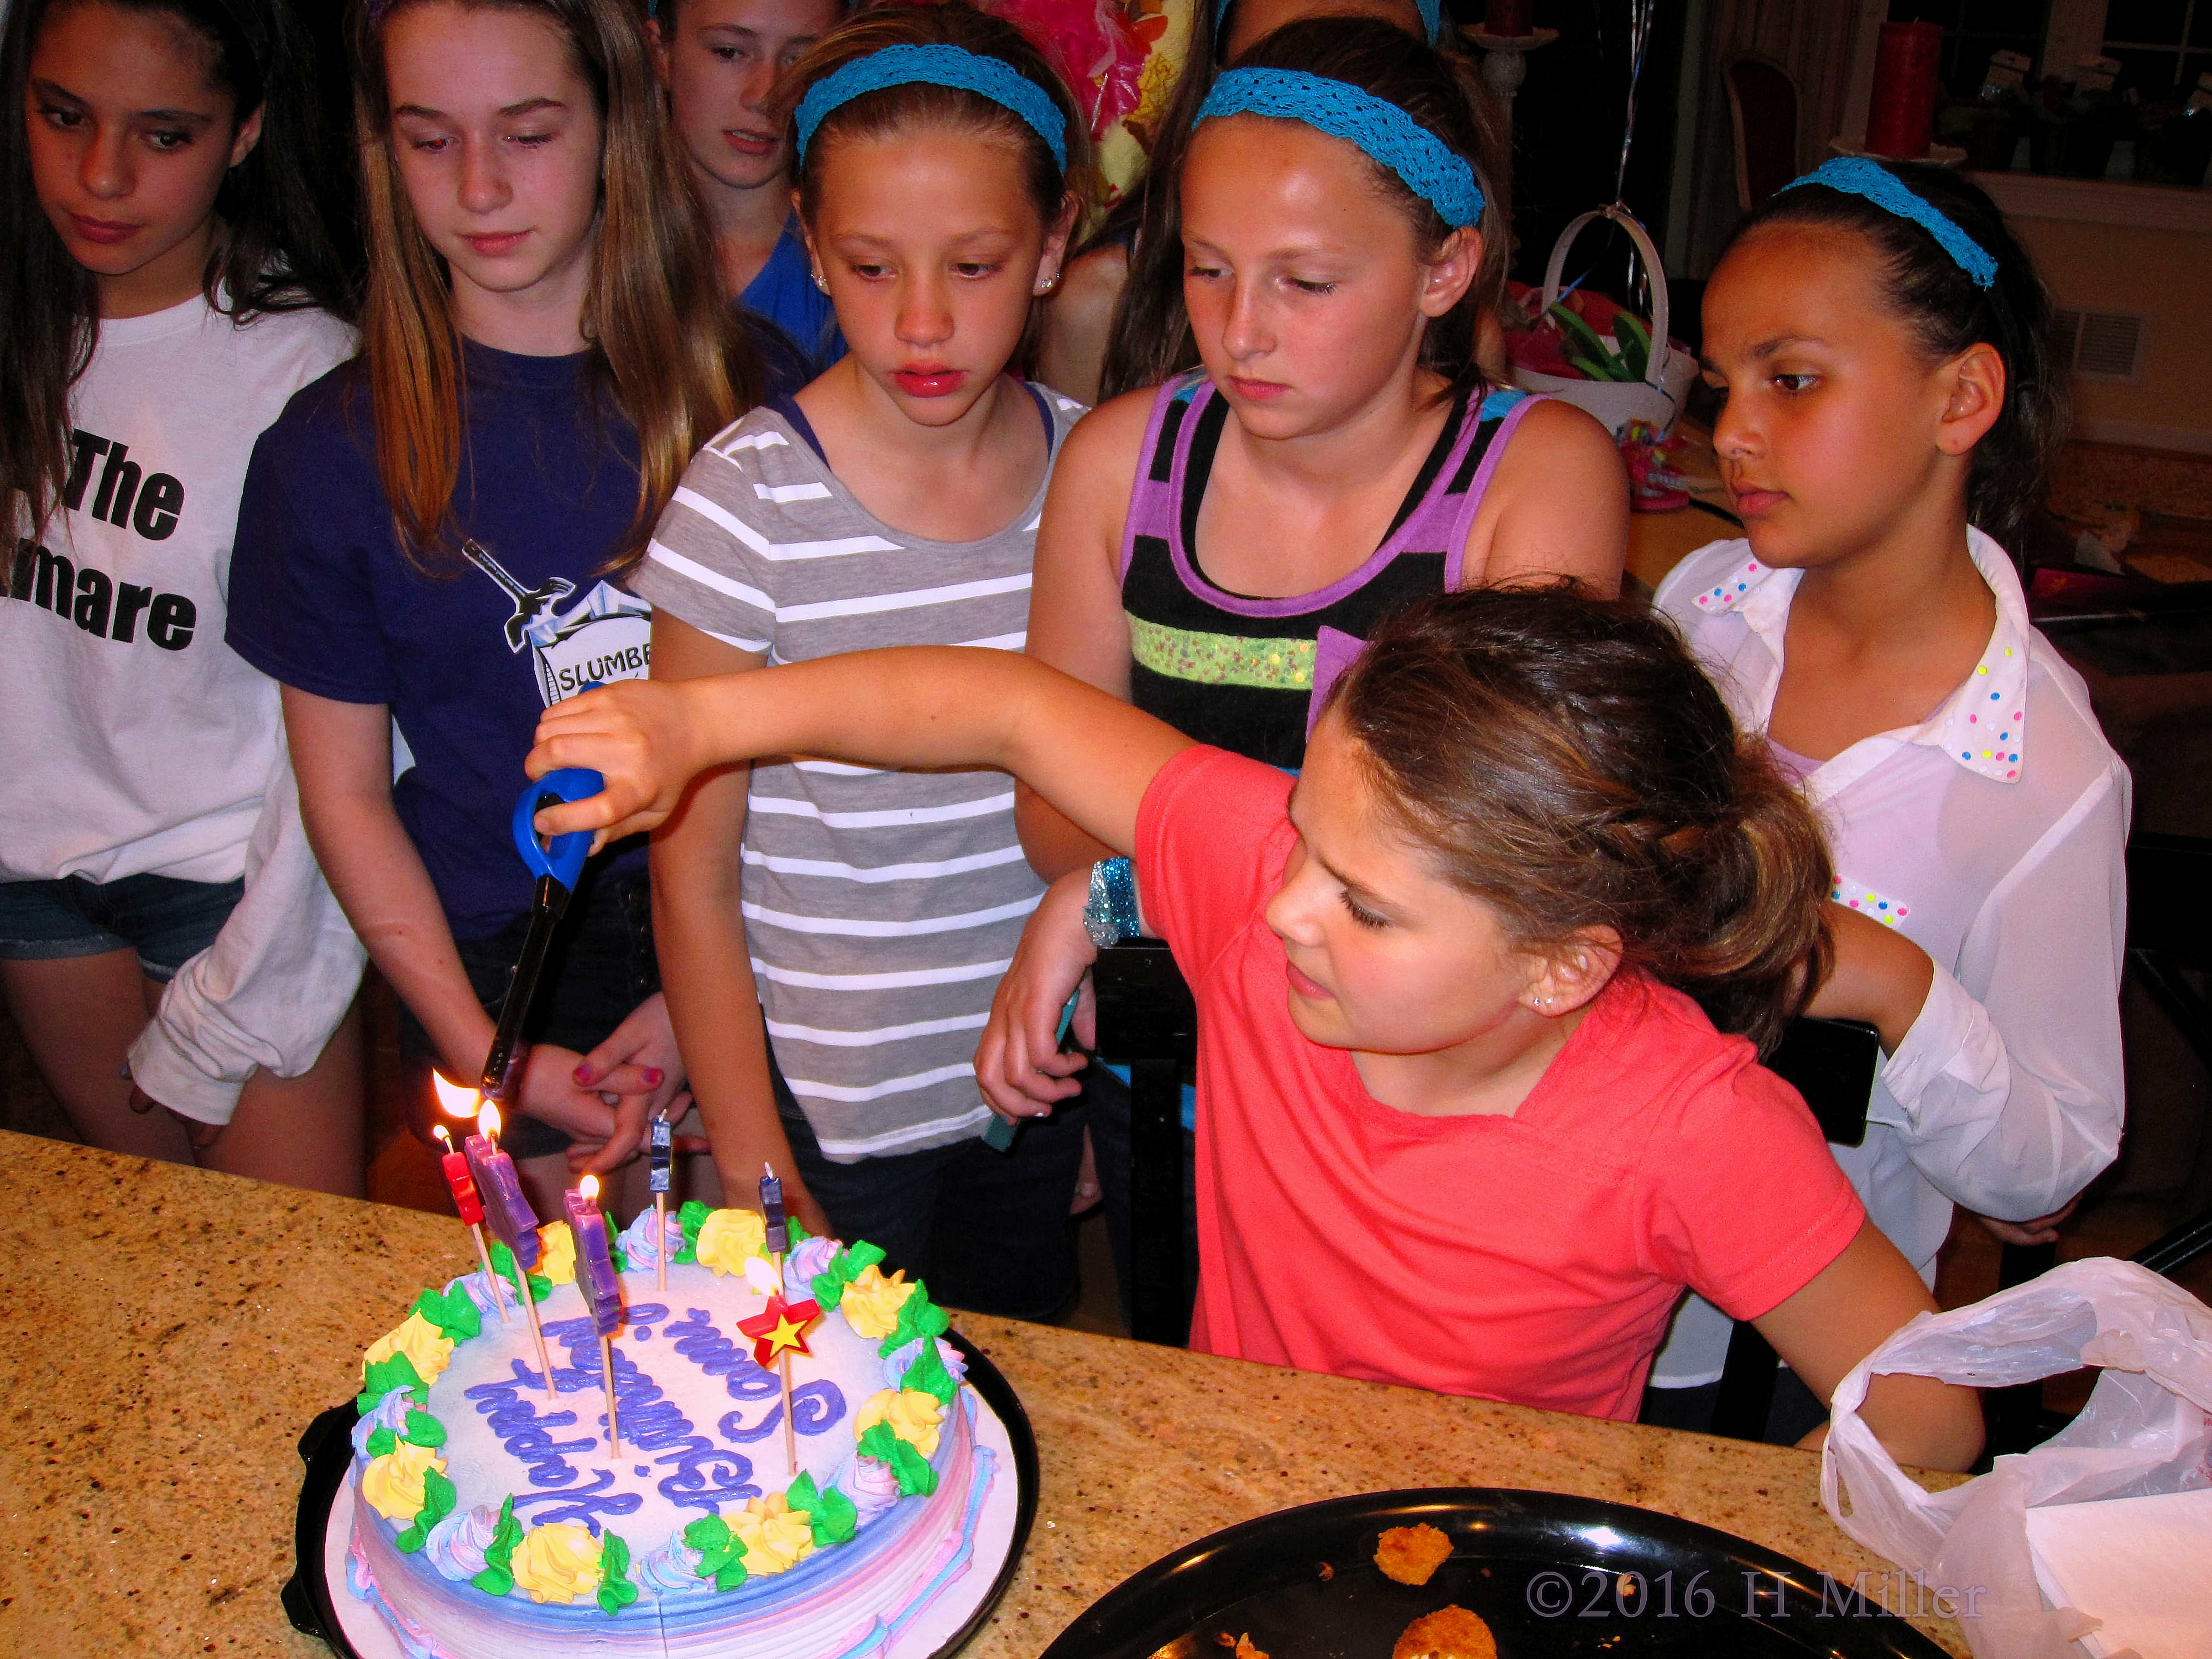 Lighting Some More Of The Birthday Candles While Her Friends Await. 